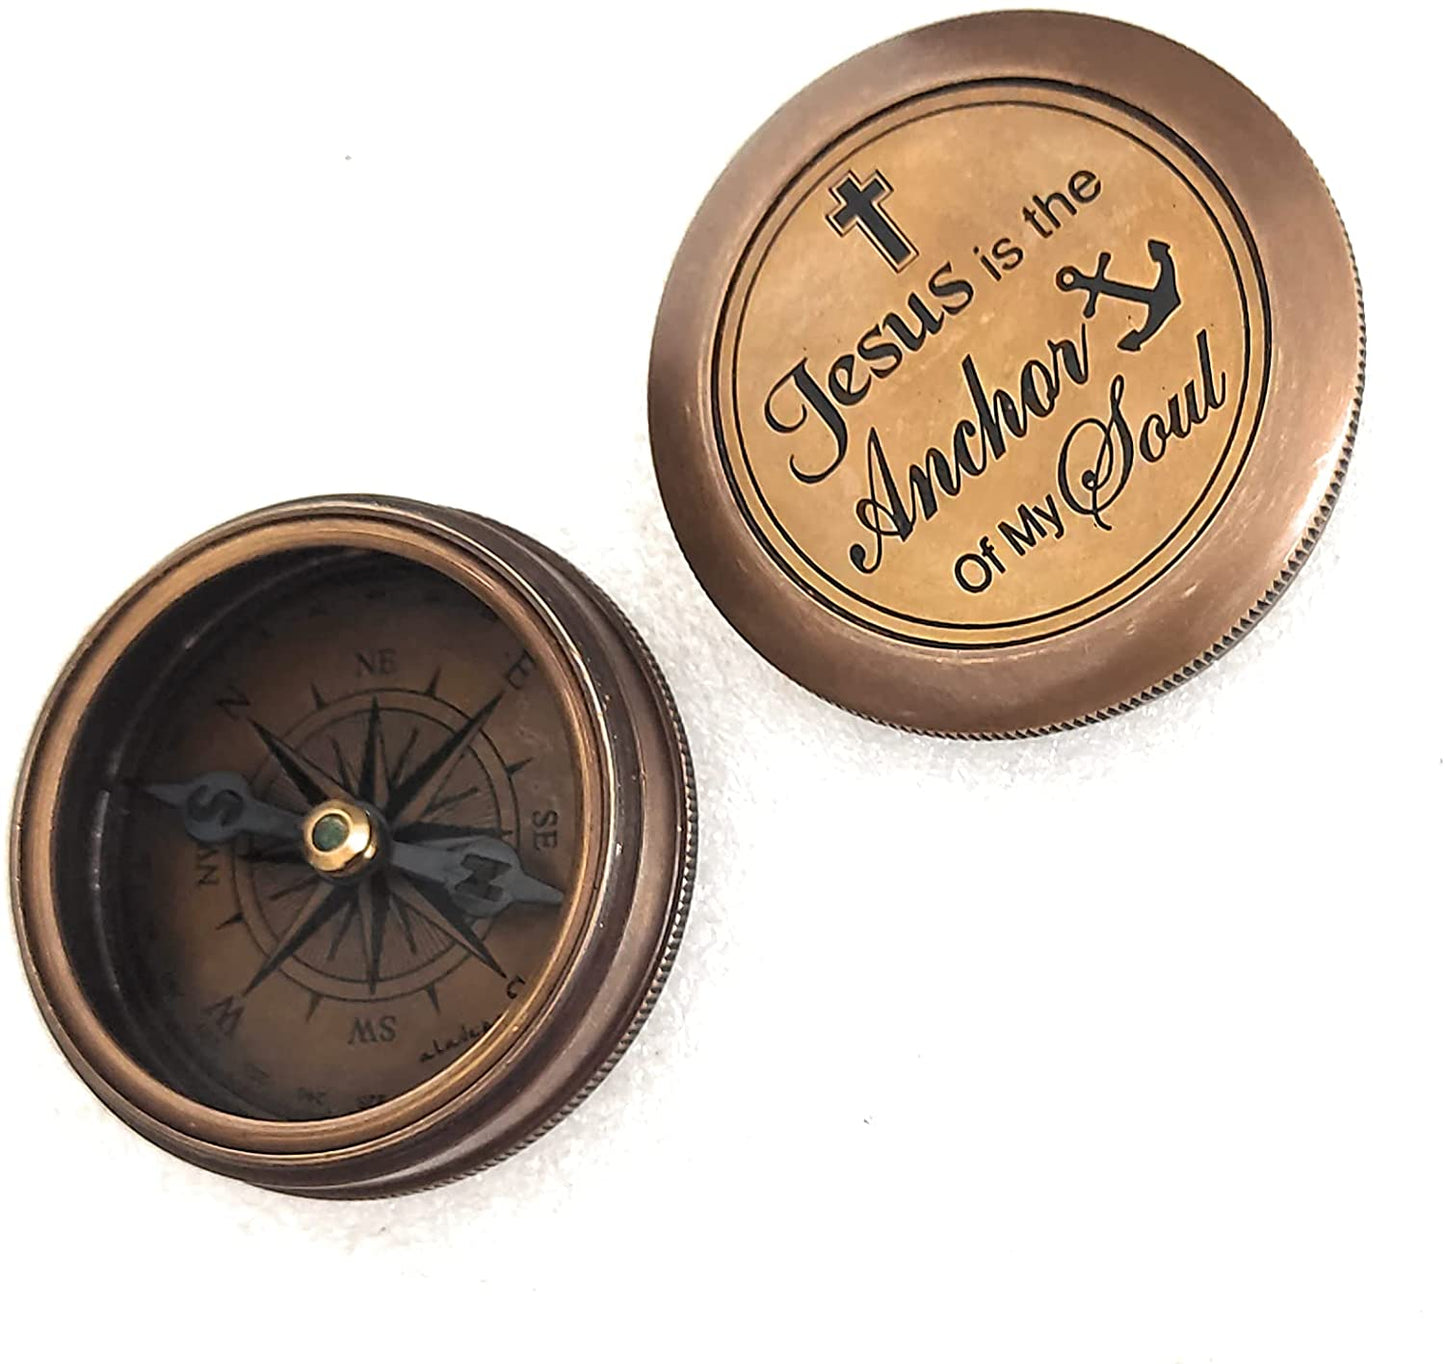 Catholic Christian Religious Gifts - Jesus is Anchor Brass Compass